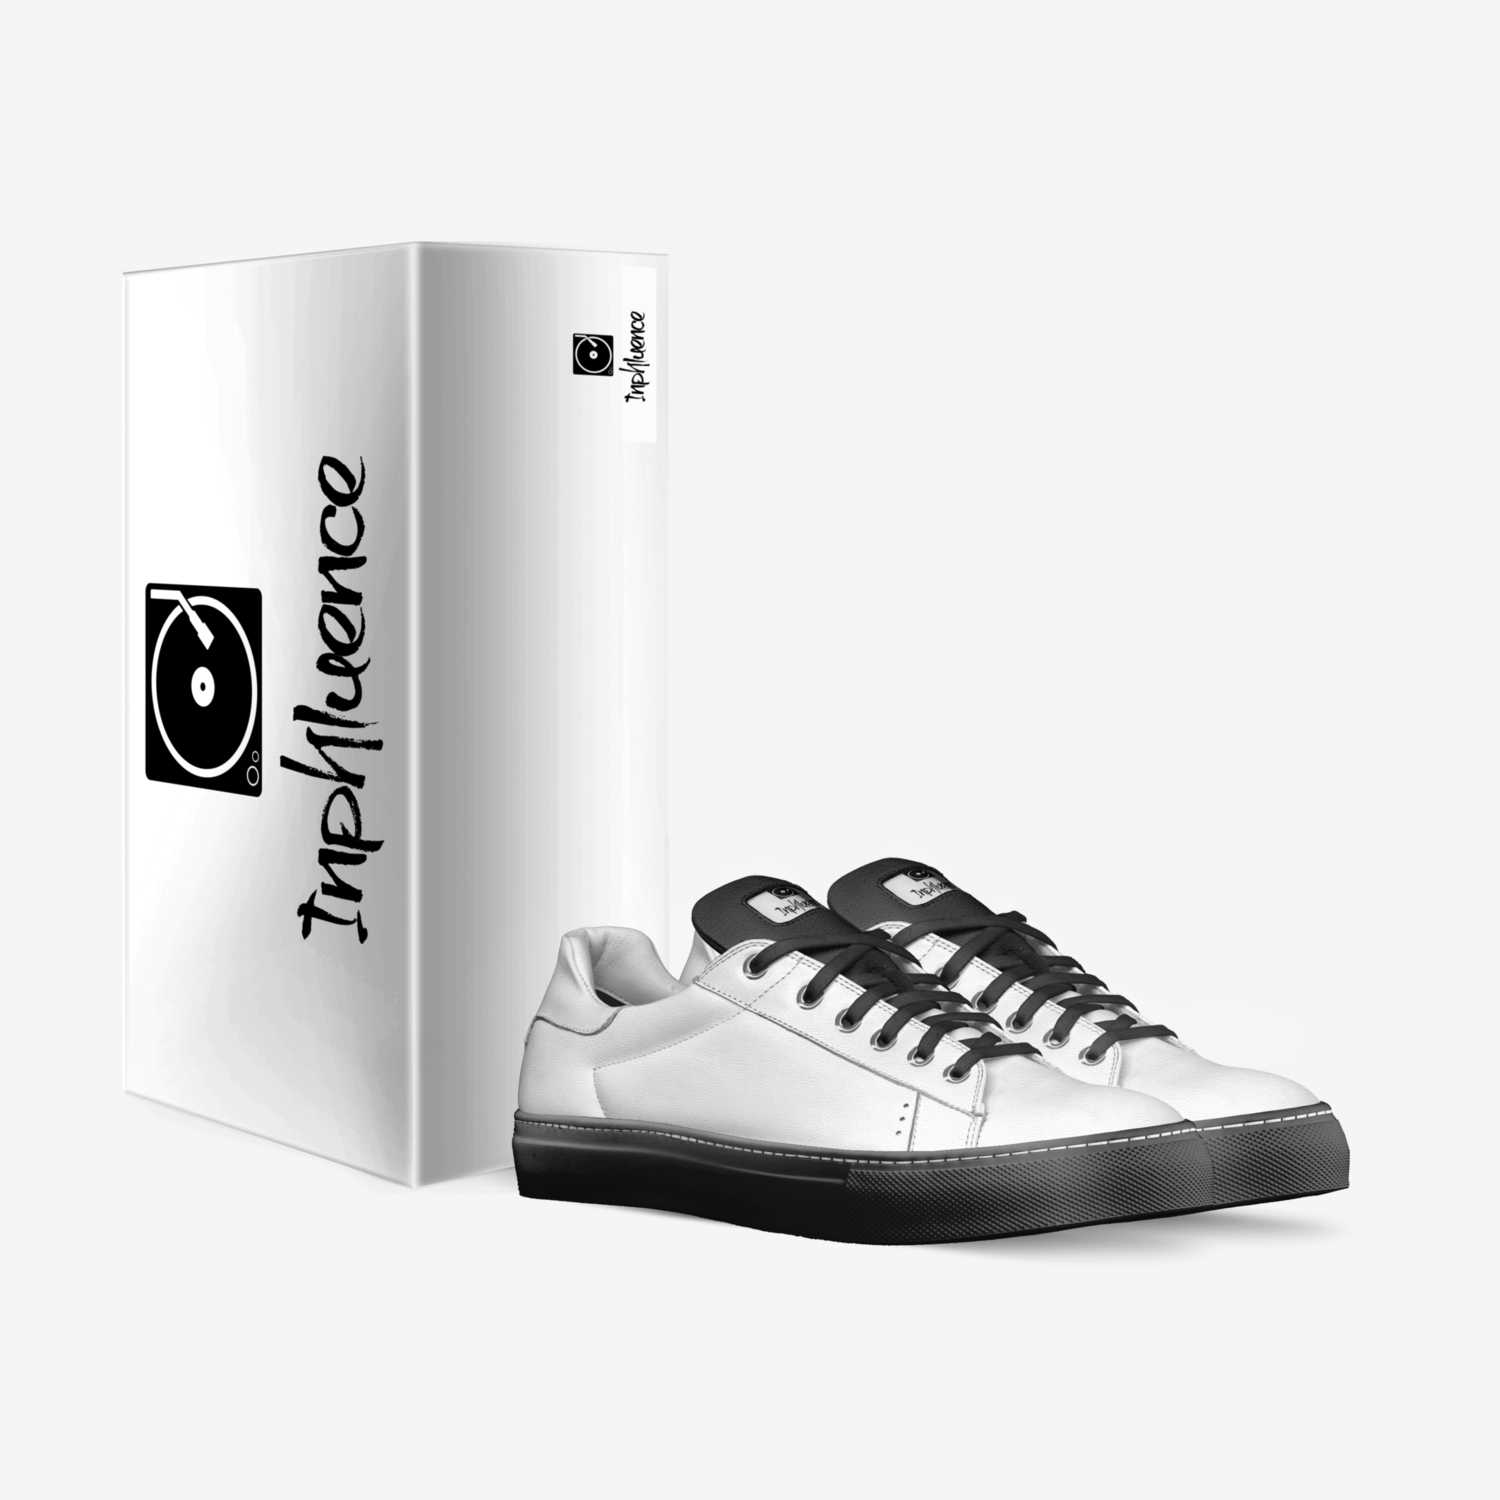 InPhluence X custom made in Italy shoes by Patrick Hill | Box view